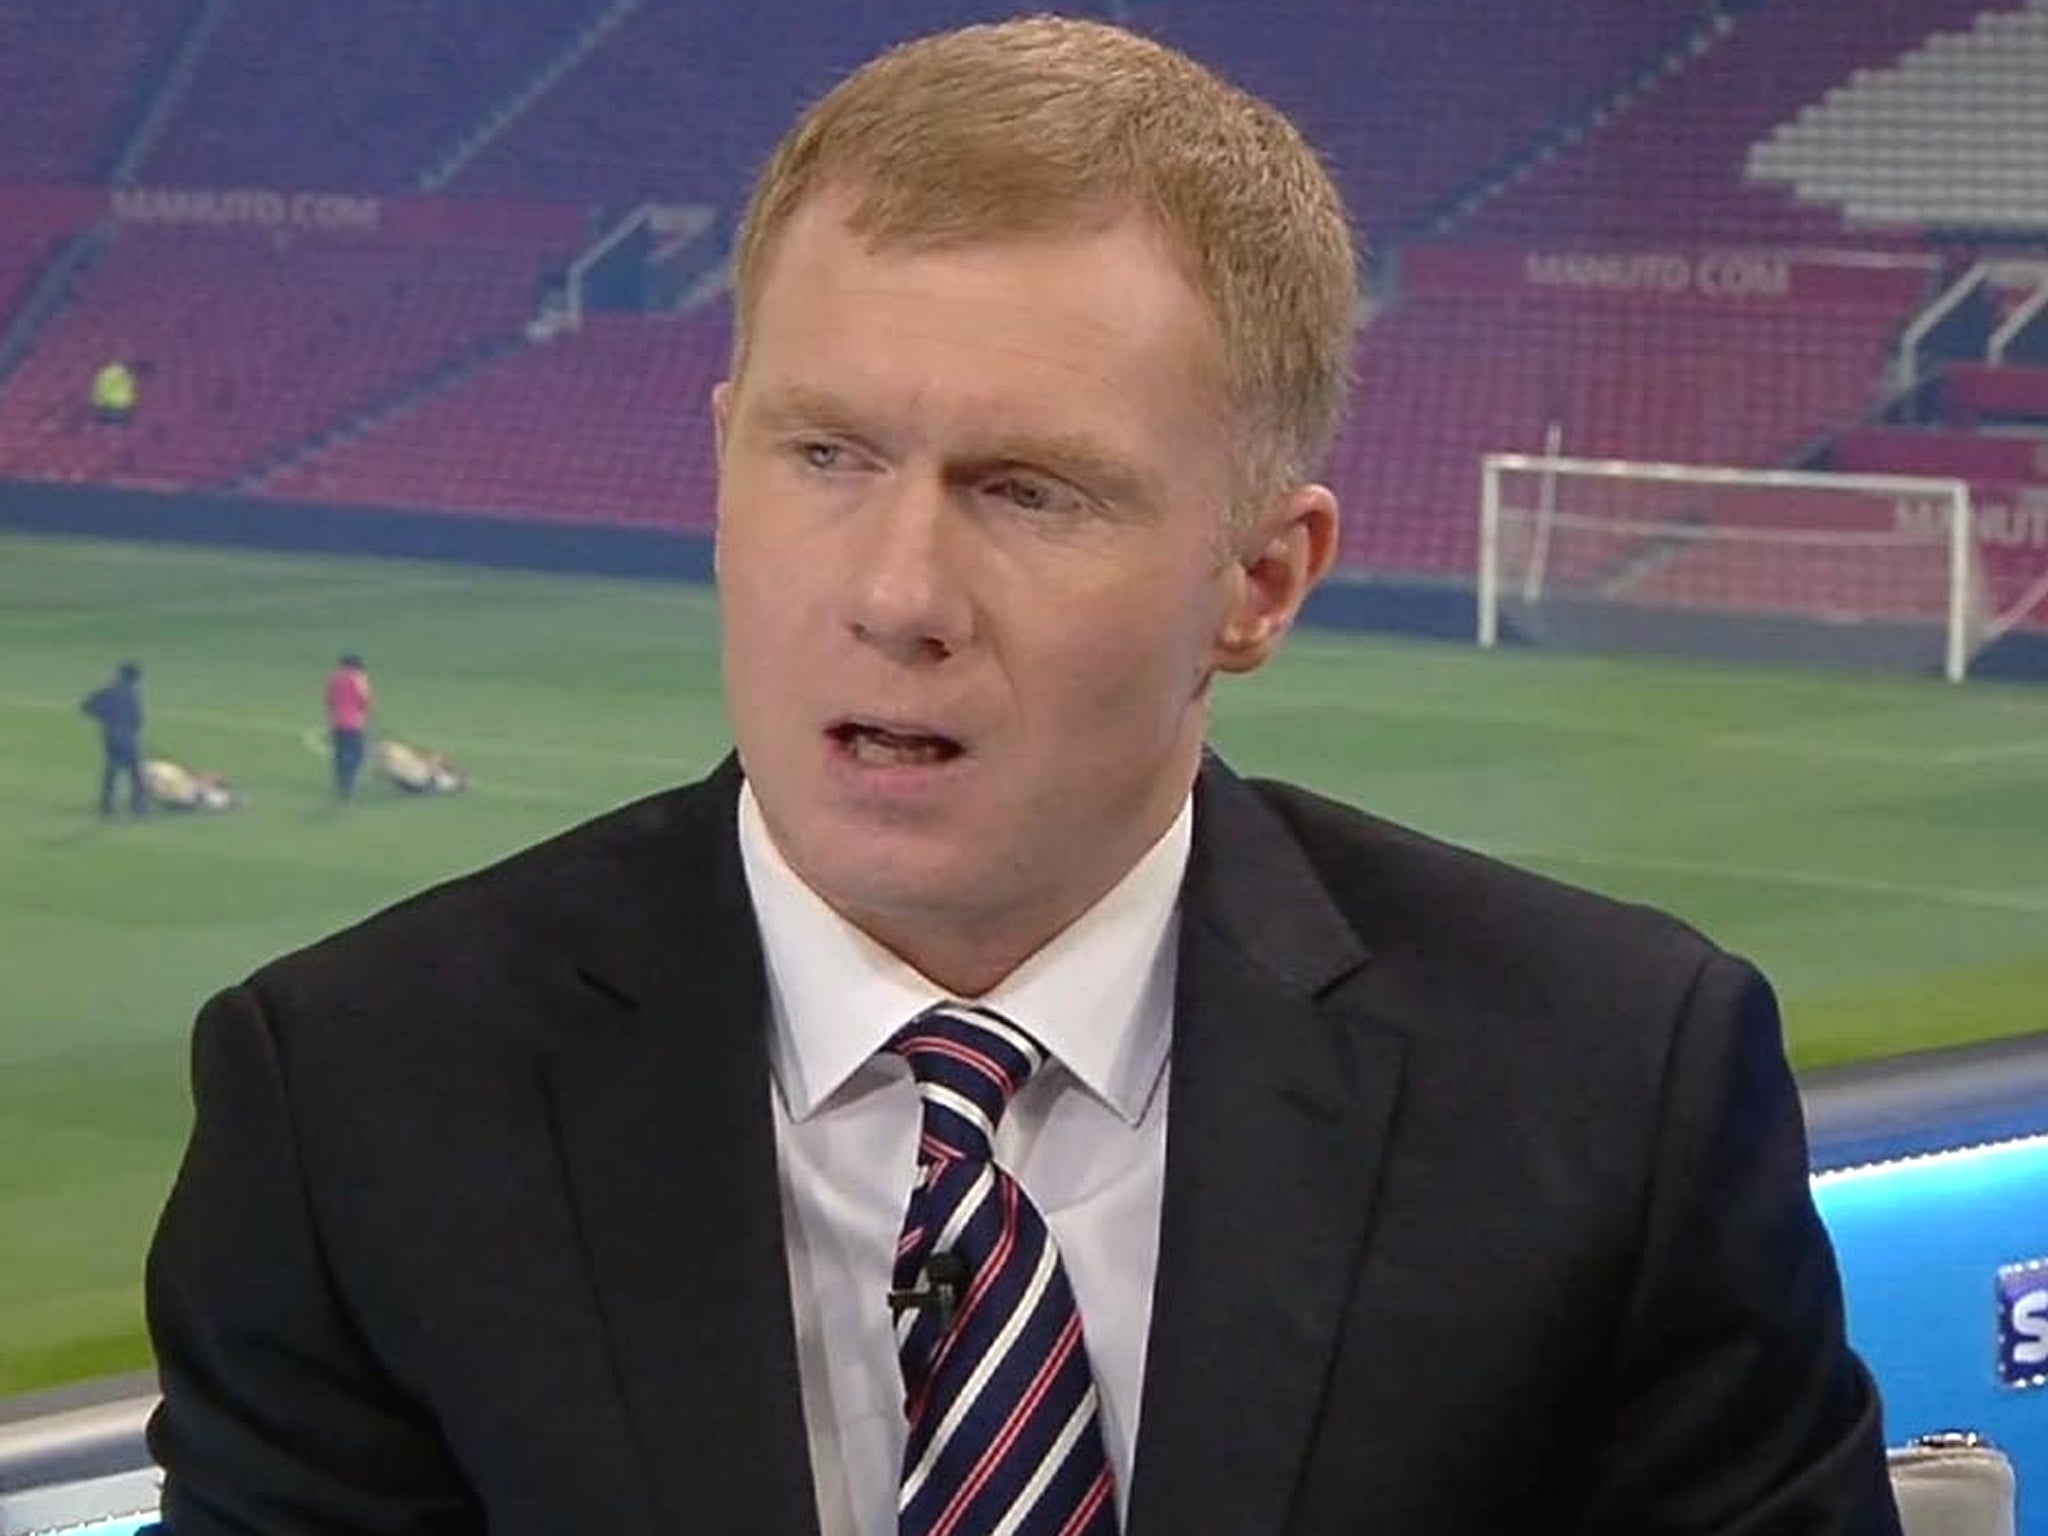 Paul Scholes expressing his criticisms after Tuesday night's game